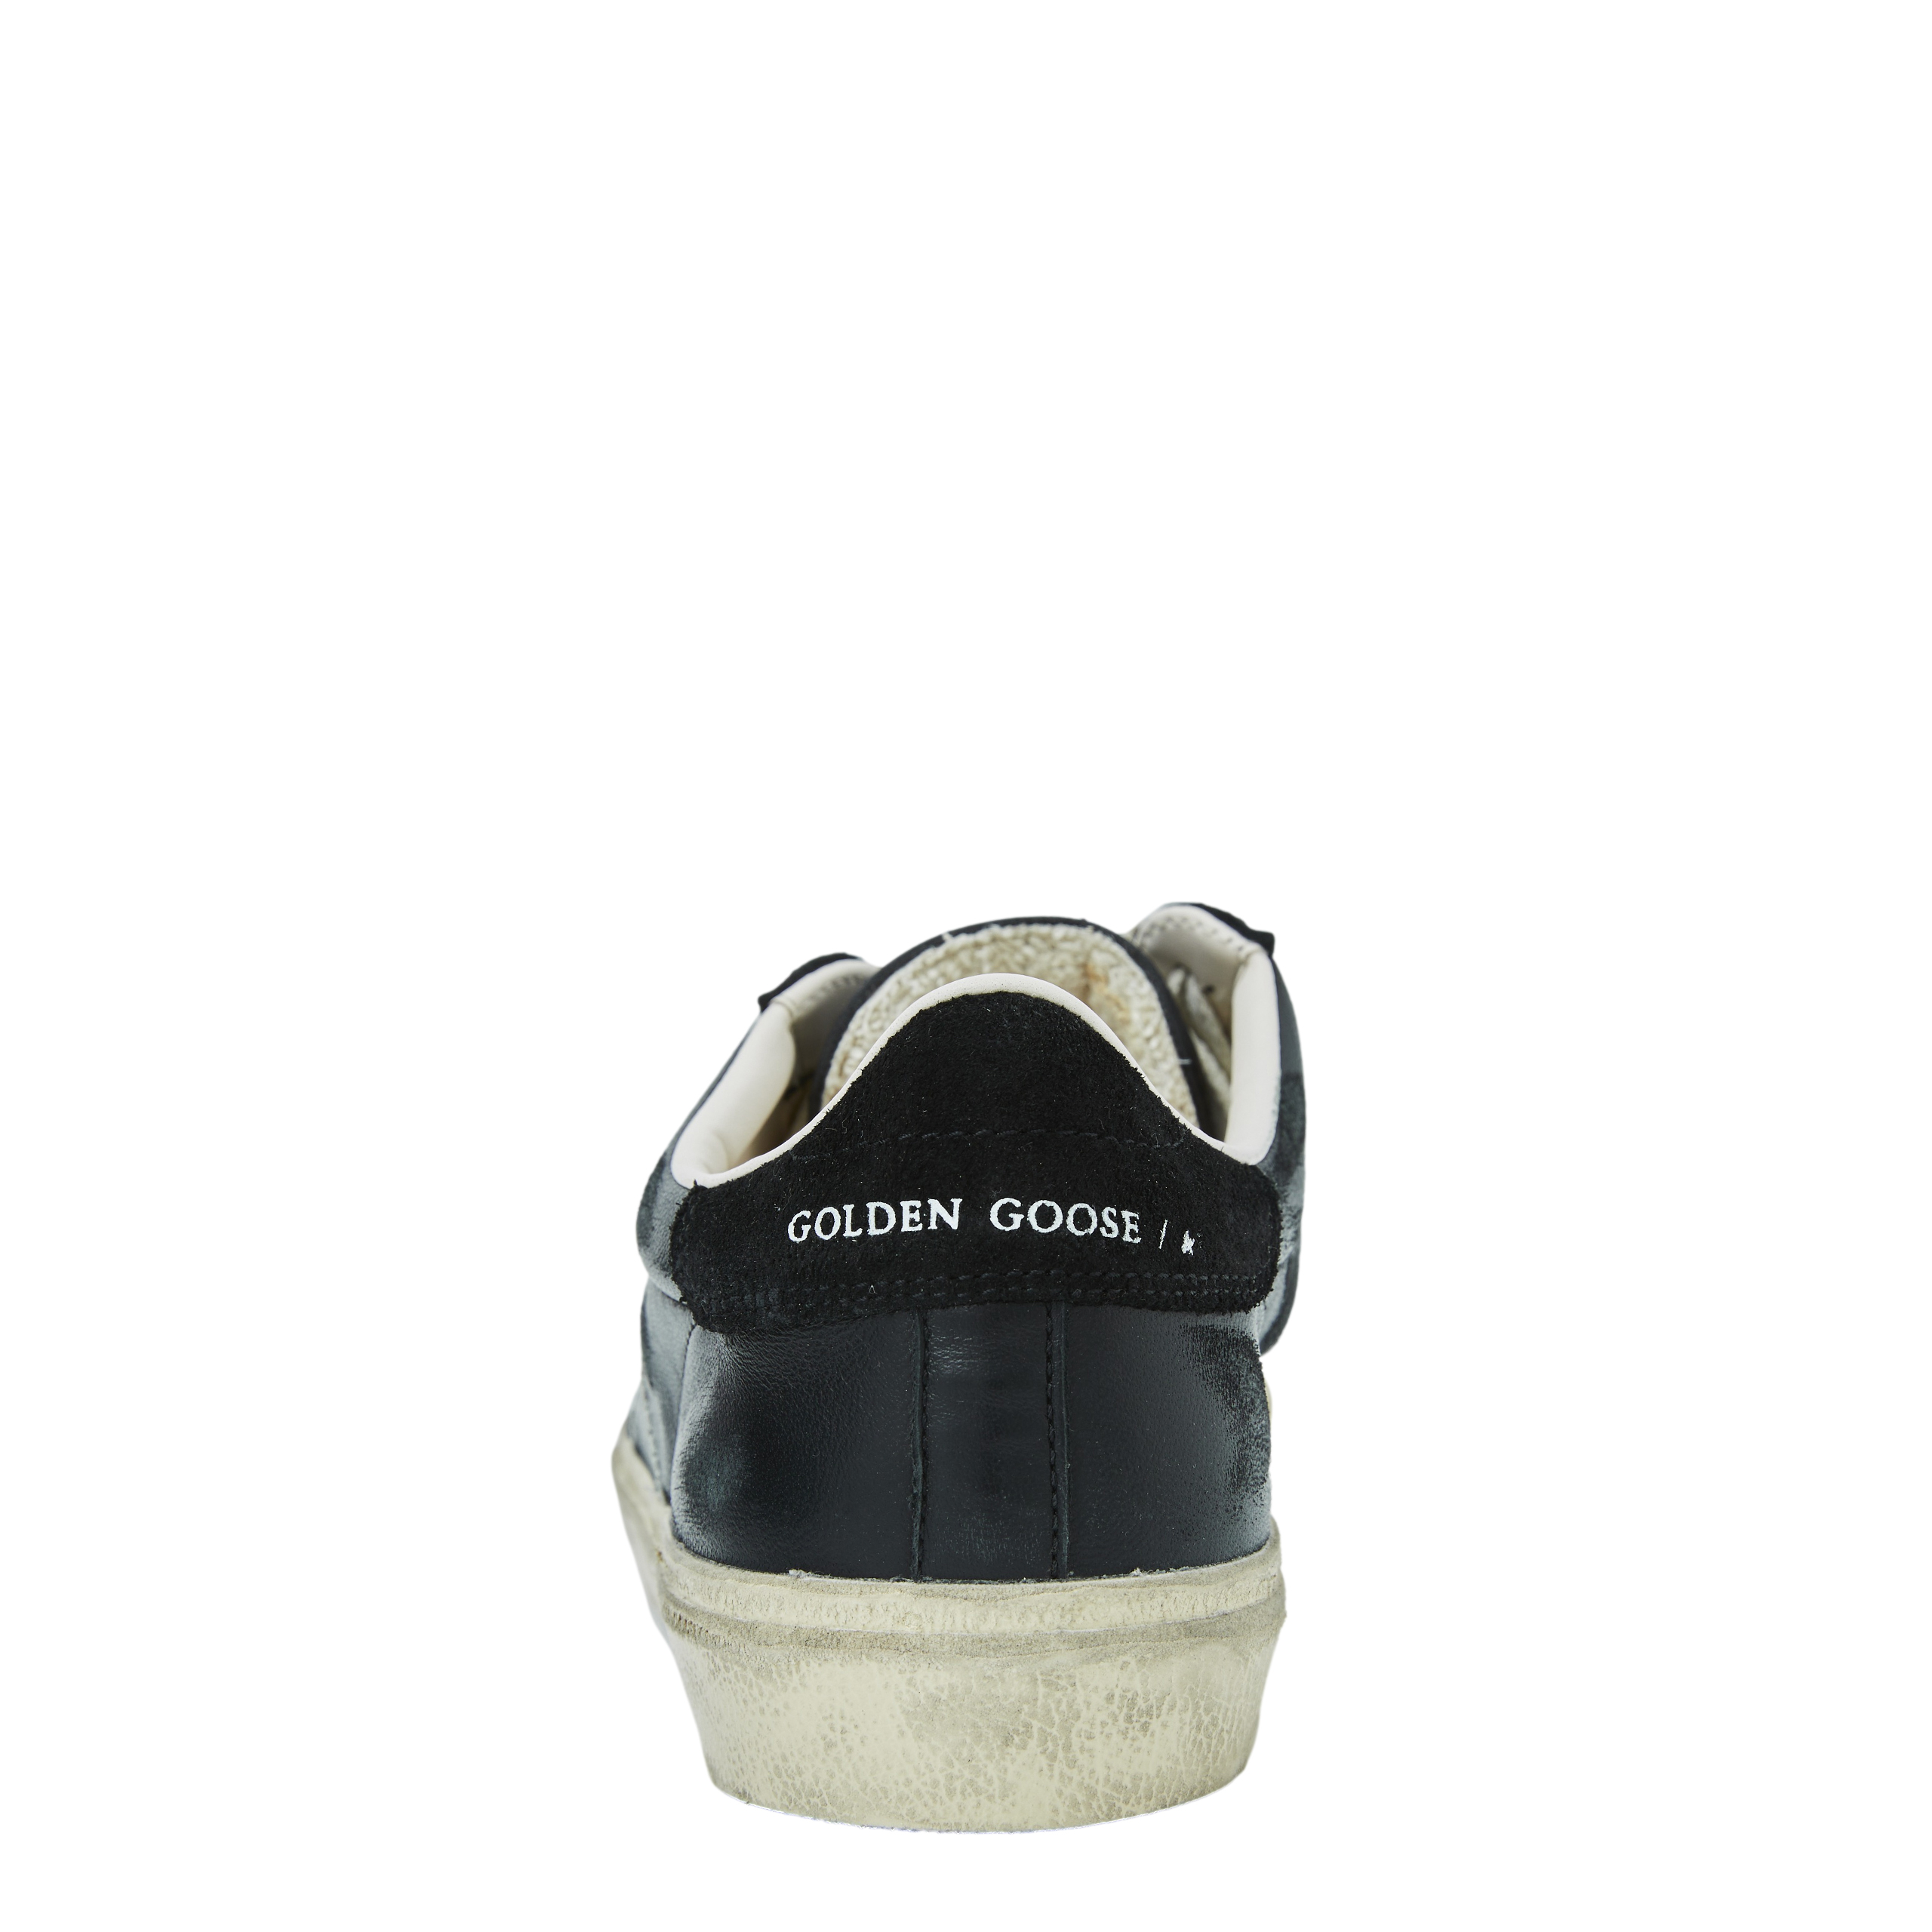 None Golden Goose Deluxe Brand GMF00464/F005050/90100, размер 44;45;46 GMF00464/F005050/90100 - фото 4